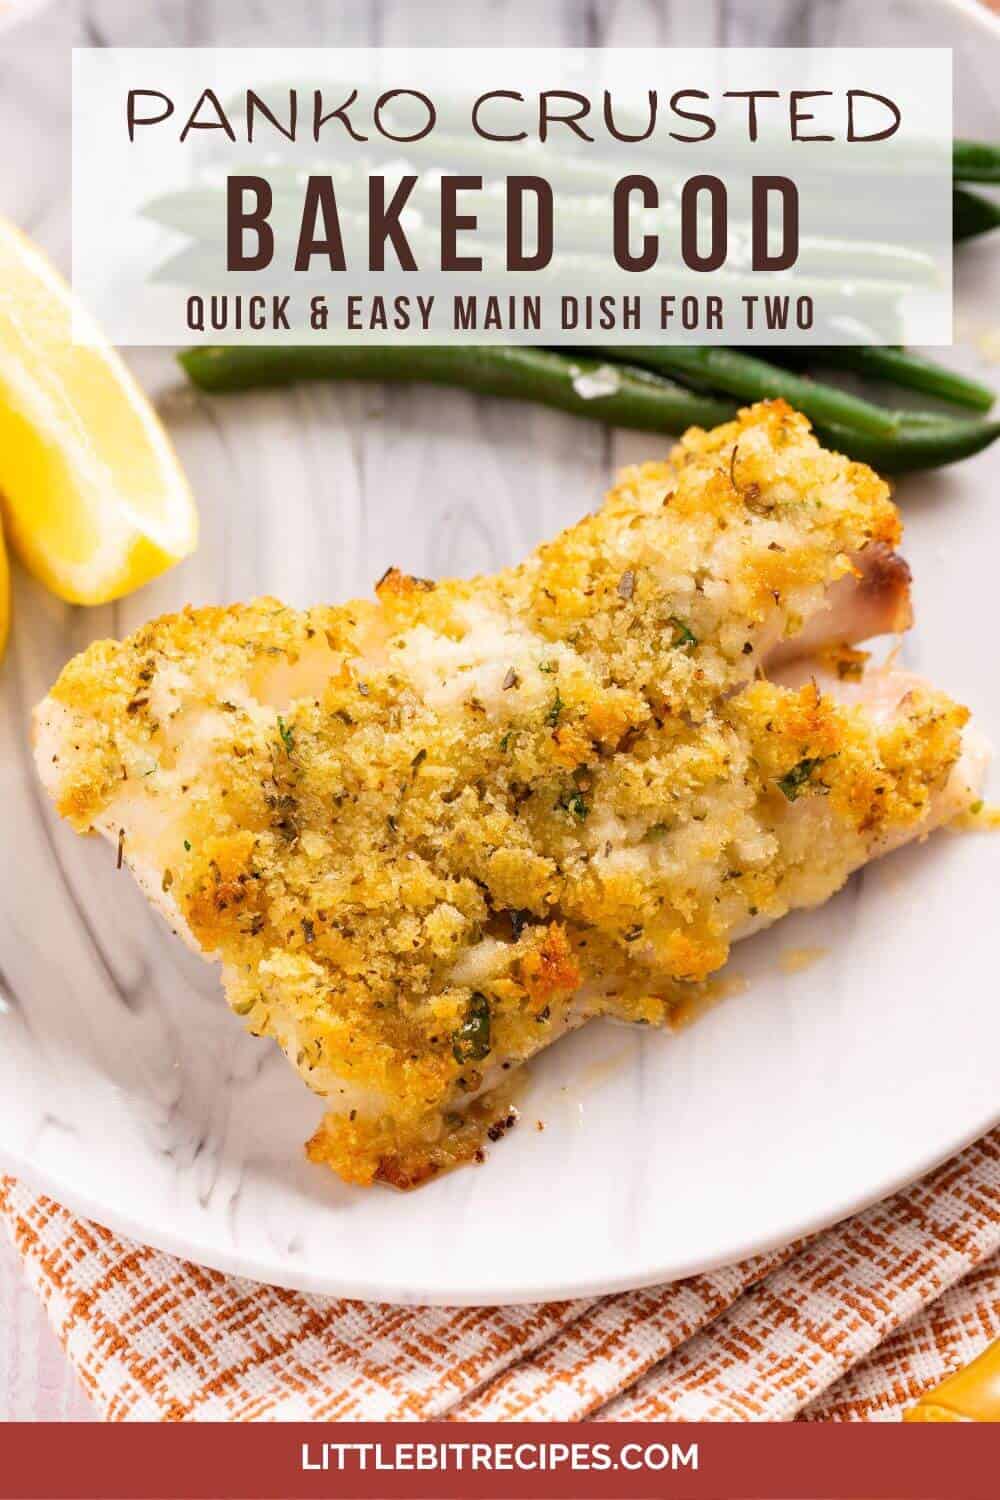 panko crusted baked cod with text.